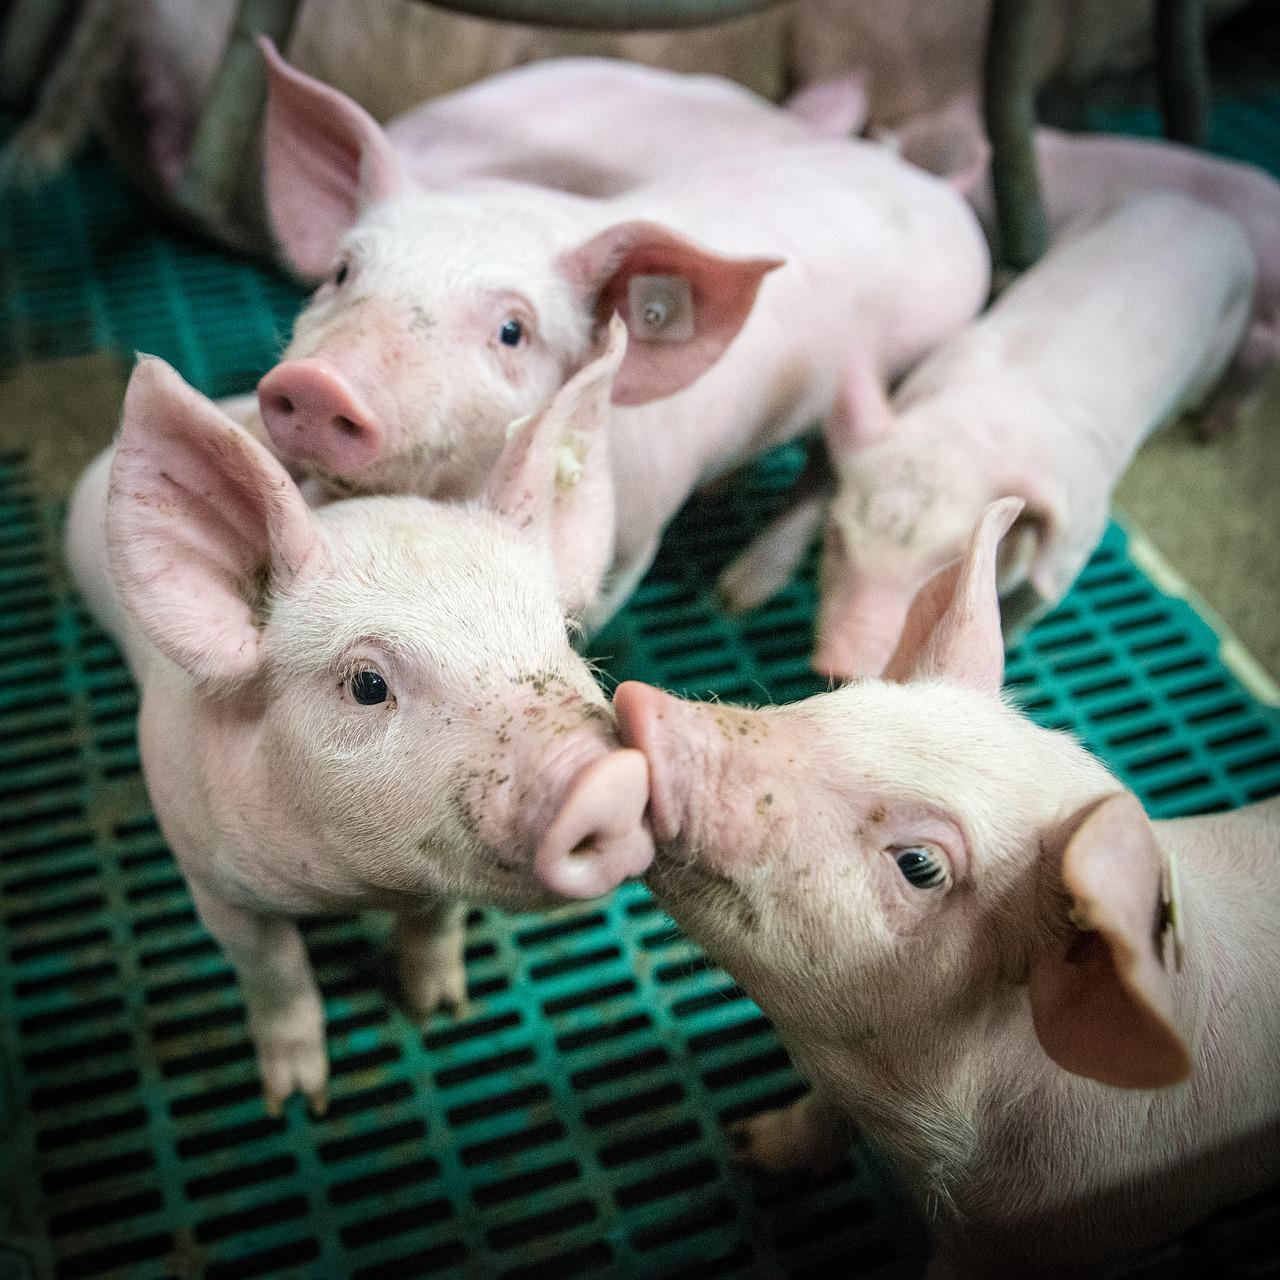 Image shows pigs on farm